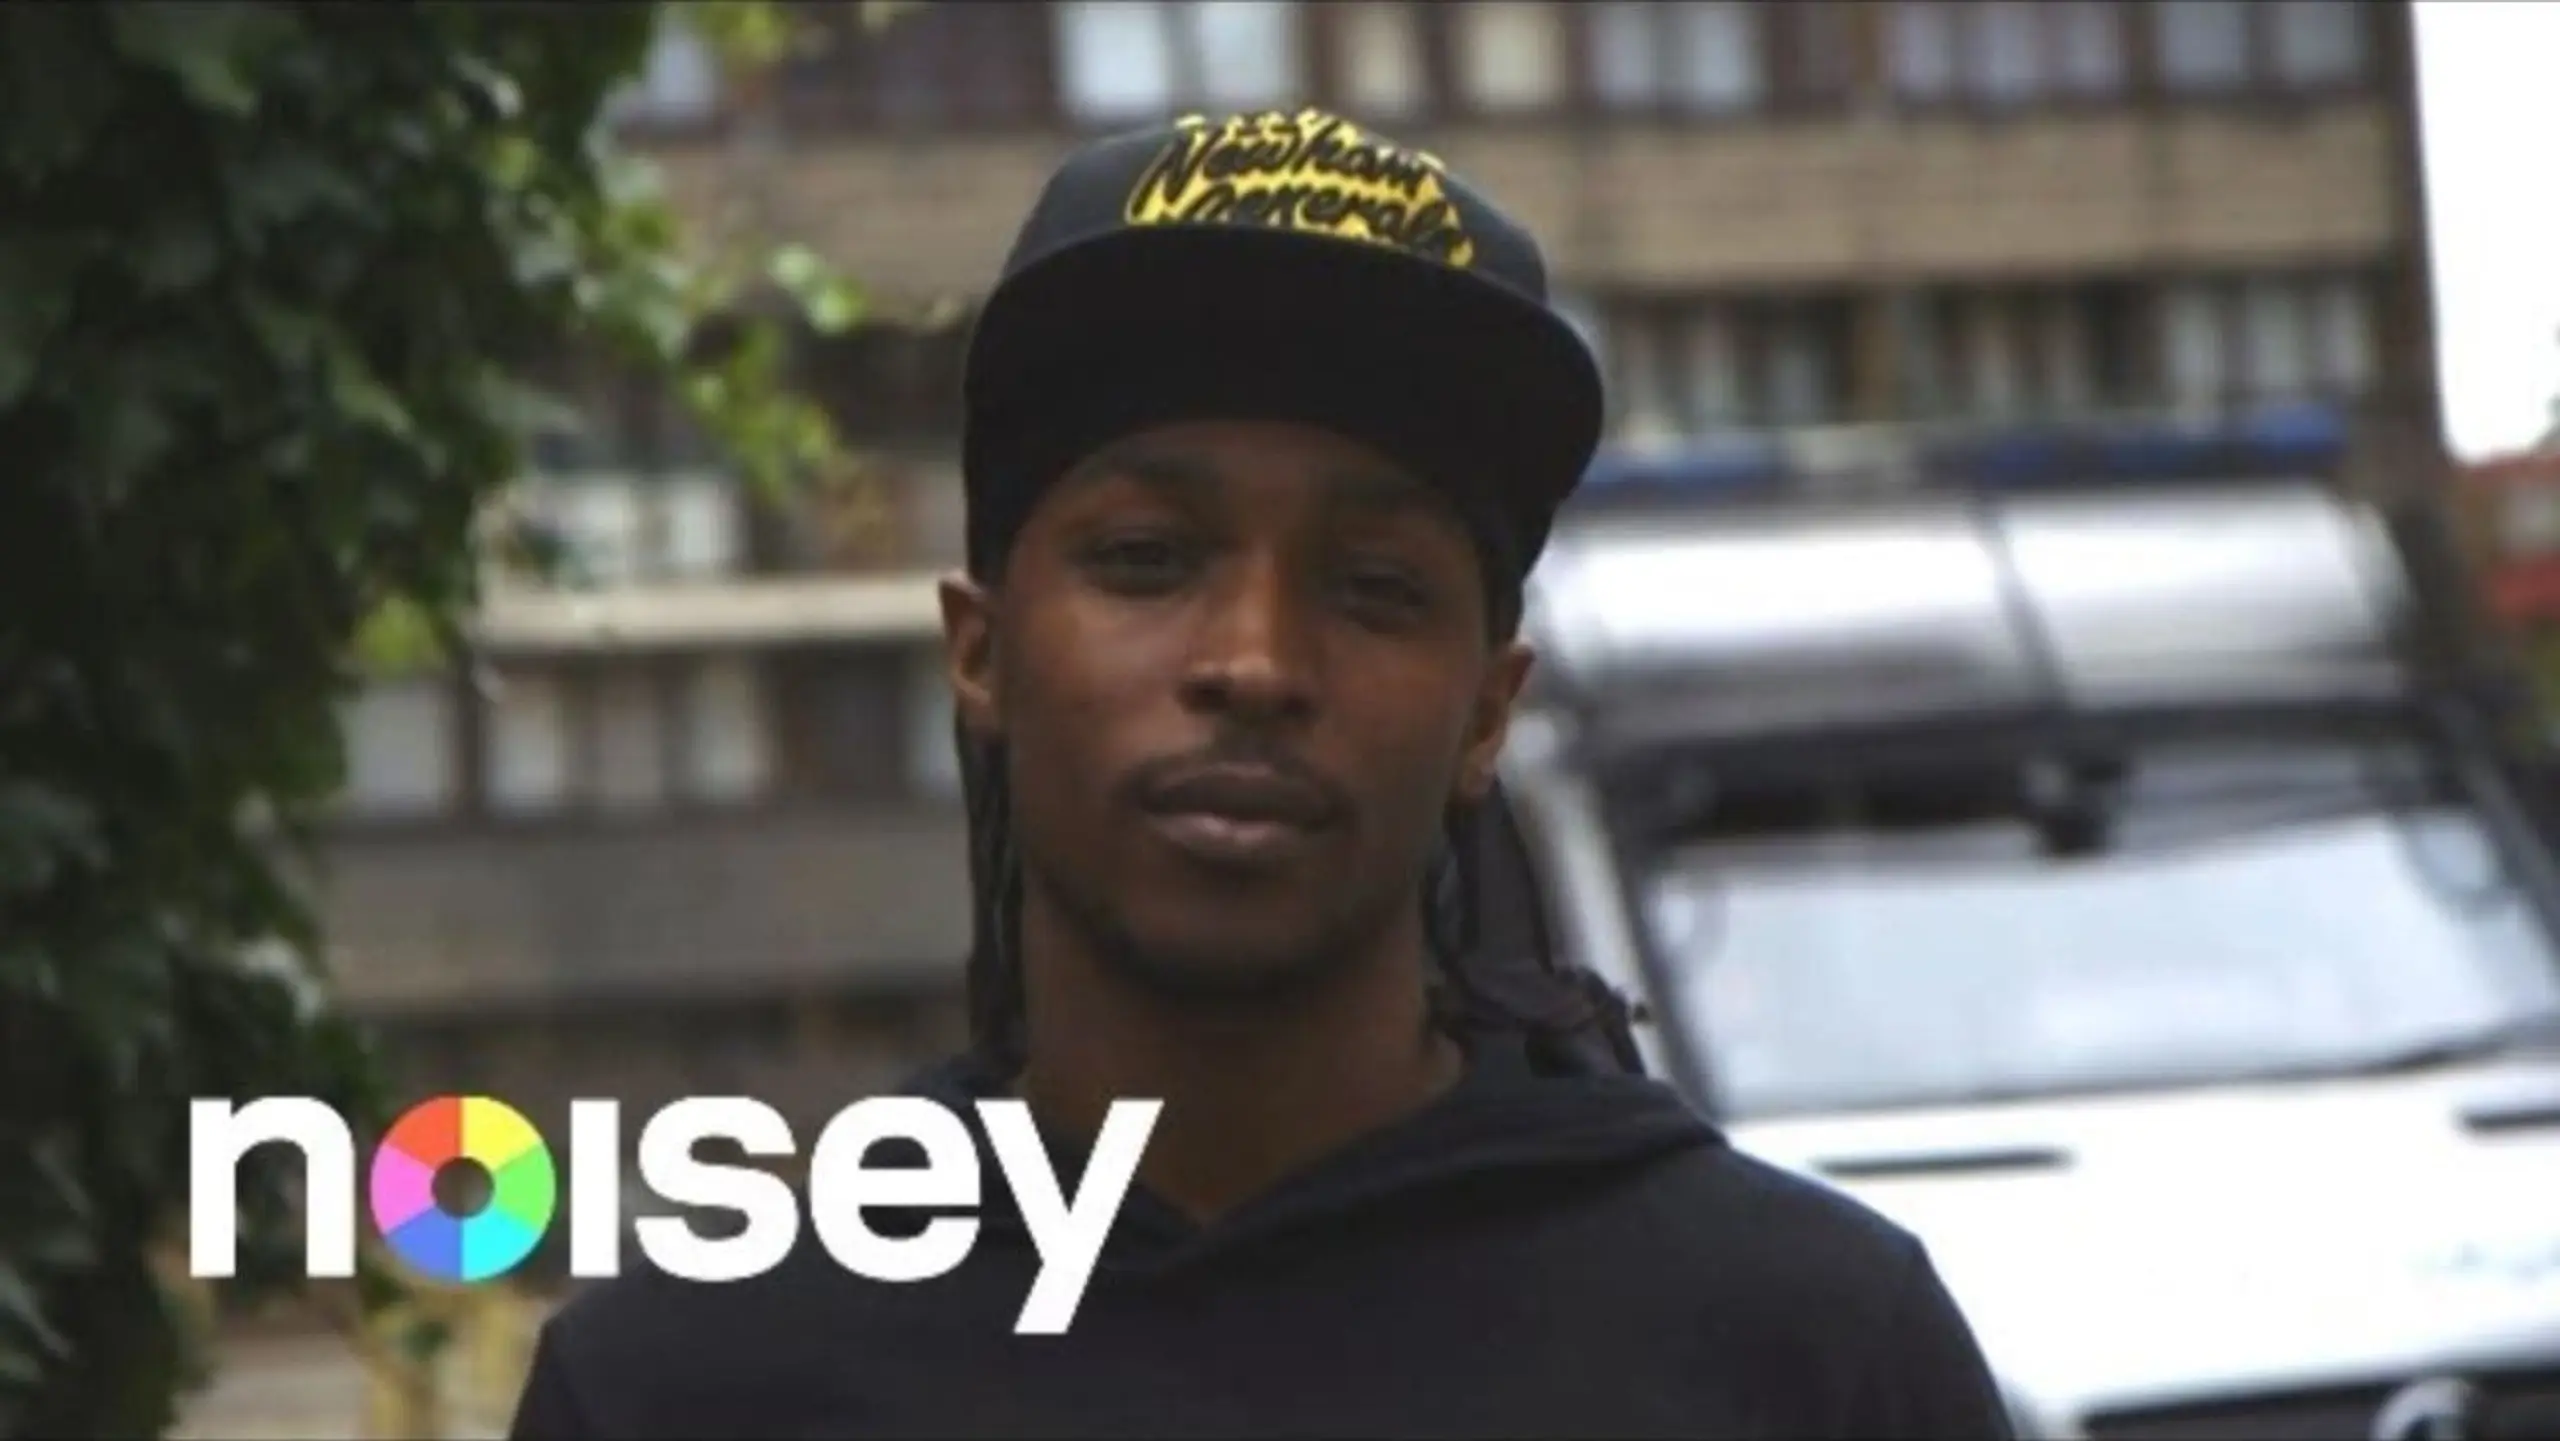 The Police vs Grime Music - A Noisey Film